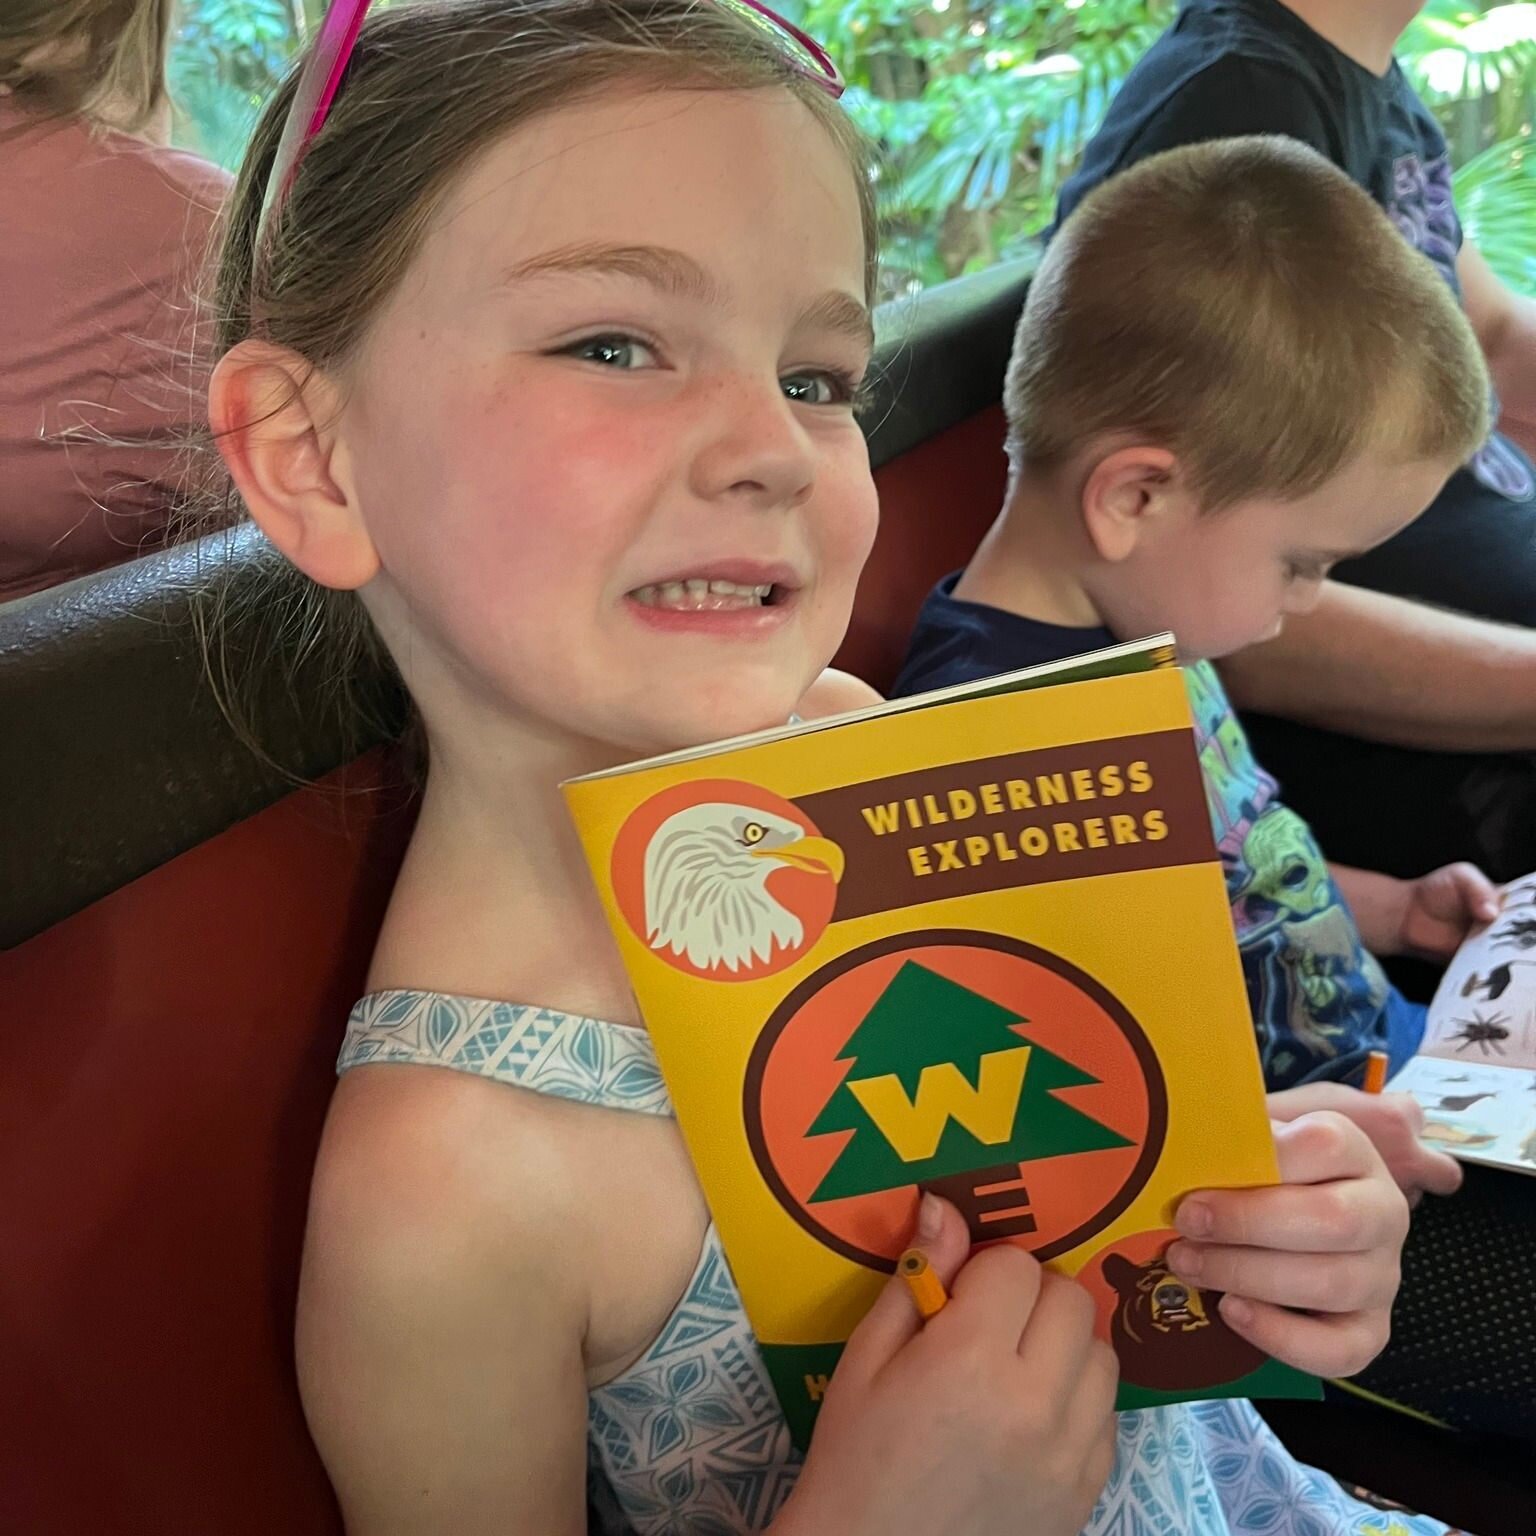 The Wilderness Must Be Explored! Ready to become an official Wilderness Explorer? At Disney's Animal Kingdom, take part on a series of fun, nature-themed challenges, collecting over 25 badges along the way! 

This is a great way for your kids to get 